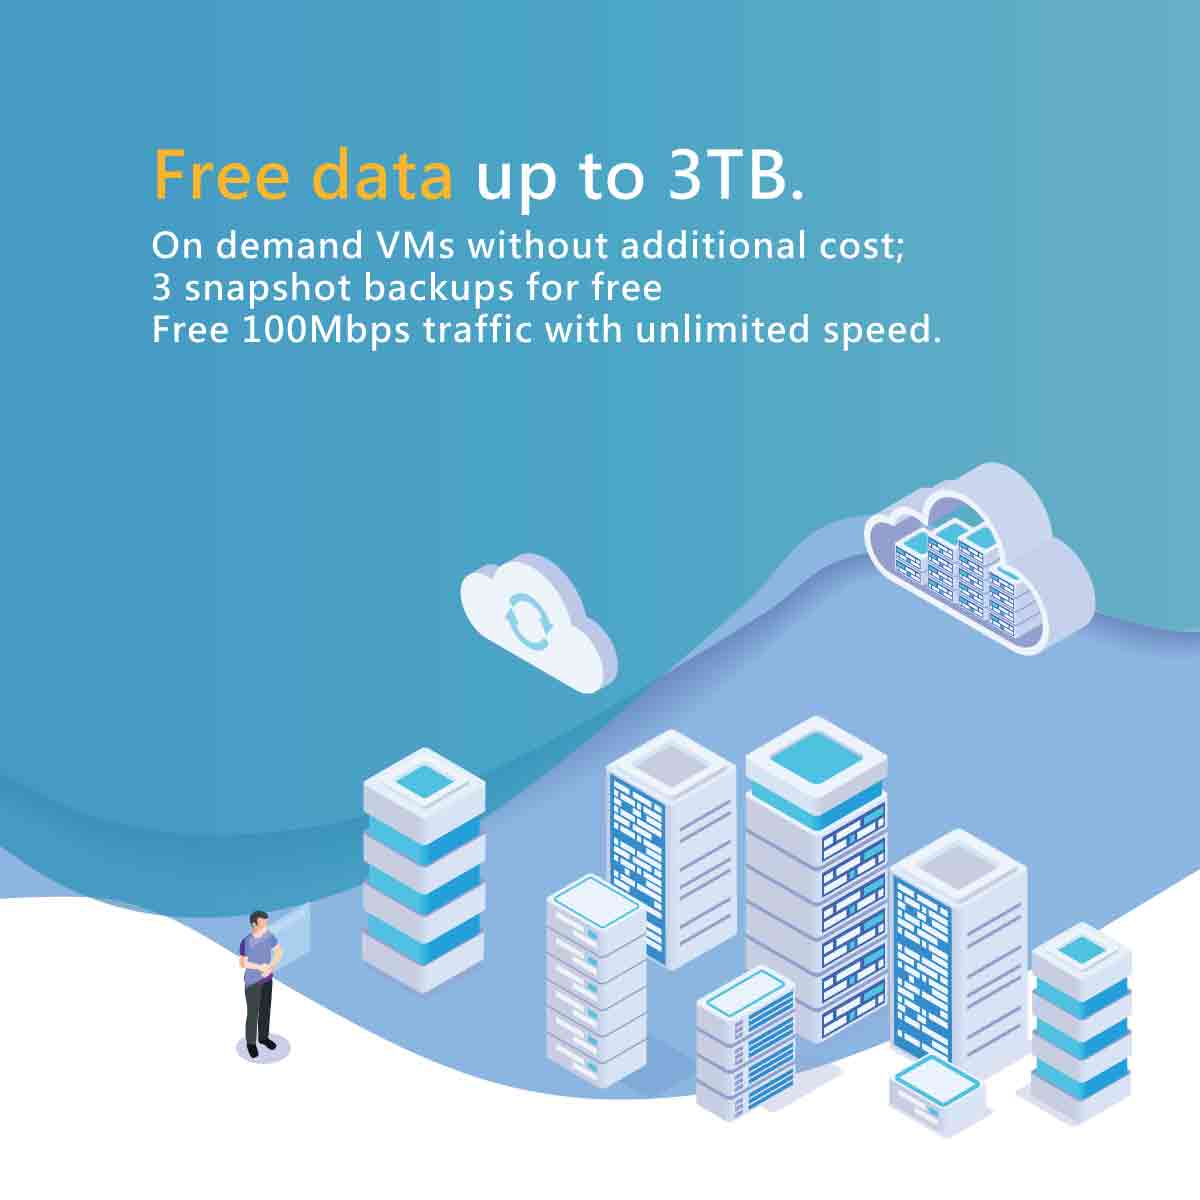 Free data up to 3TB